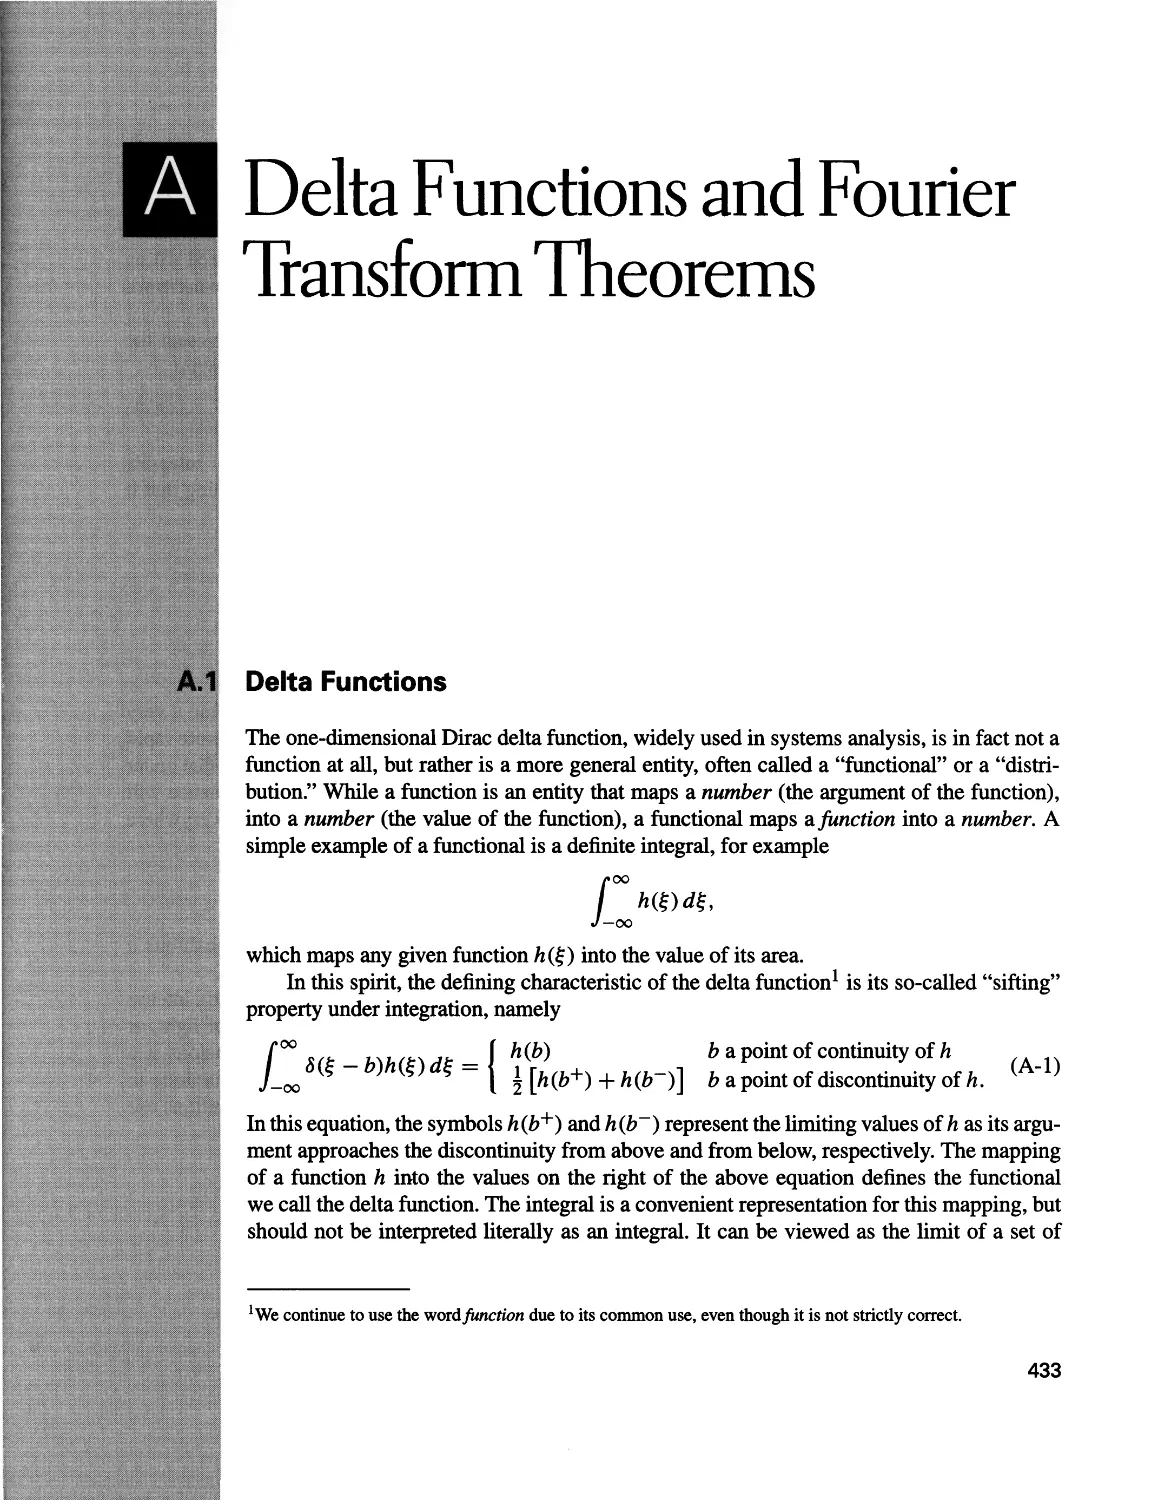 A Delta Functions and Fourier Transform Theorems 433